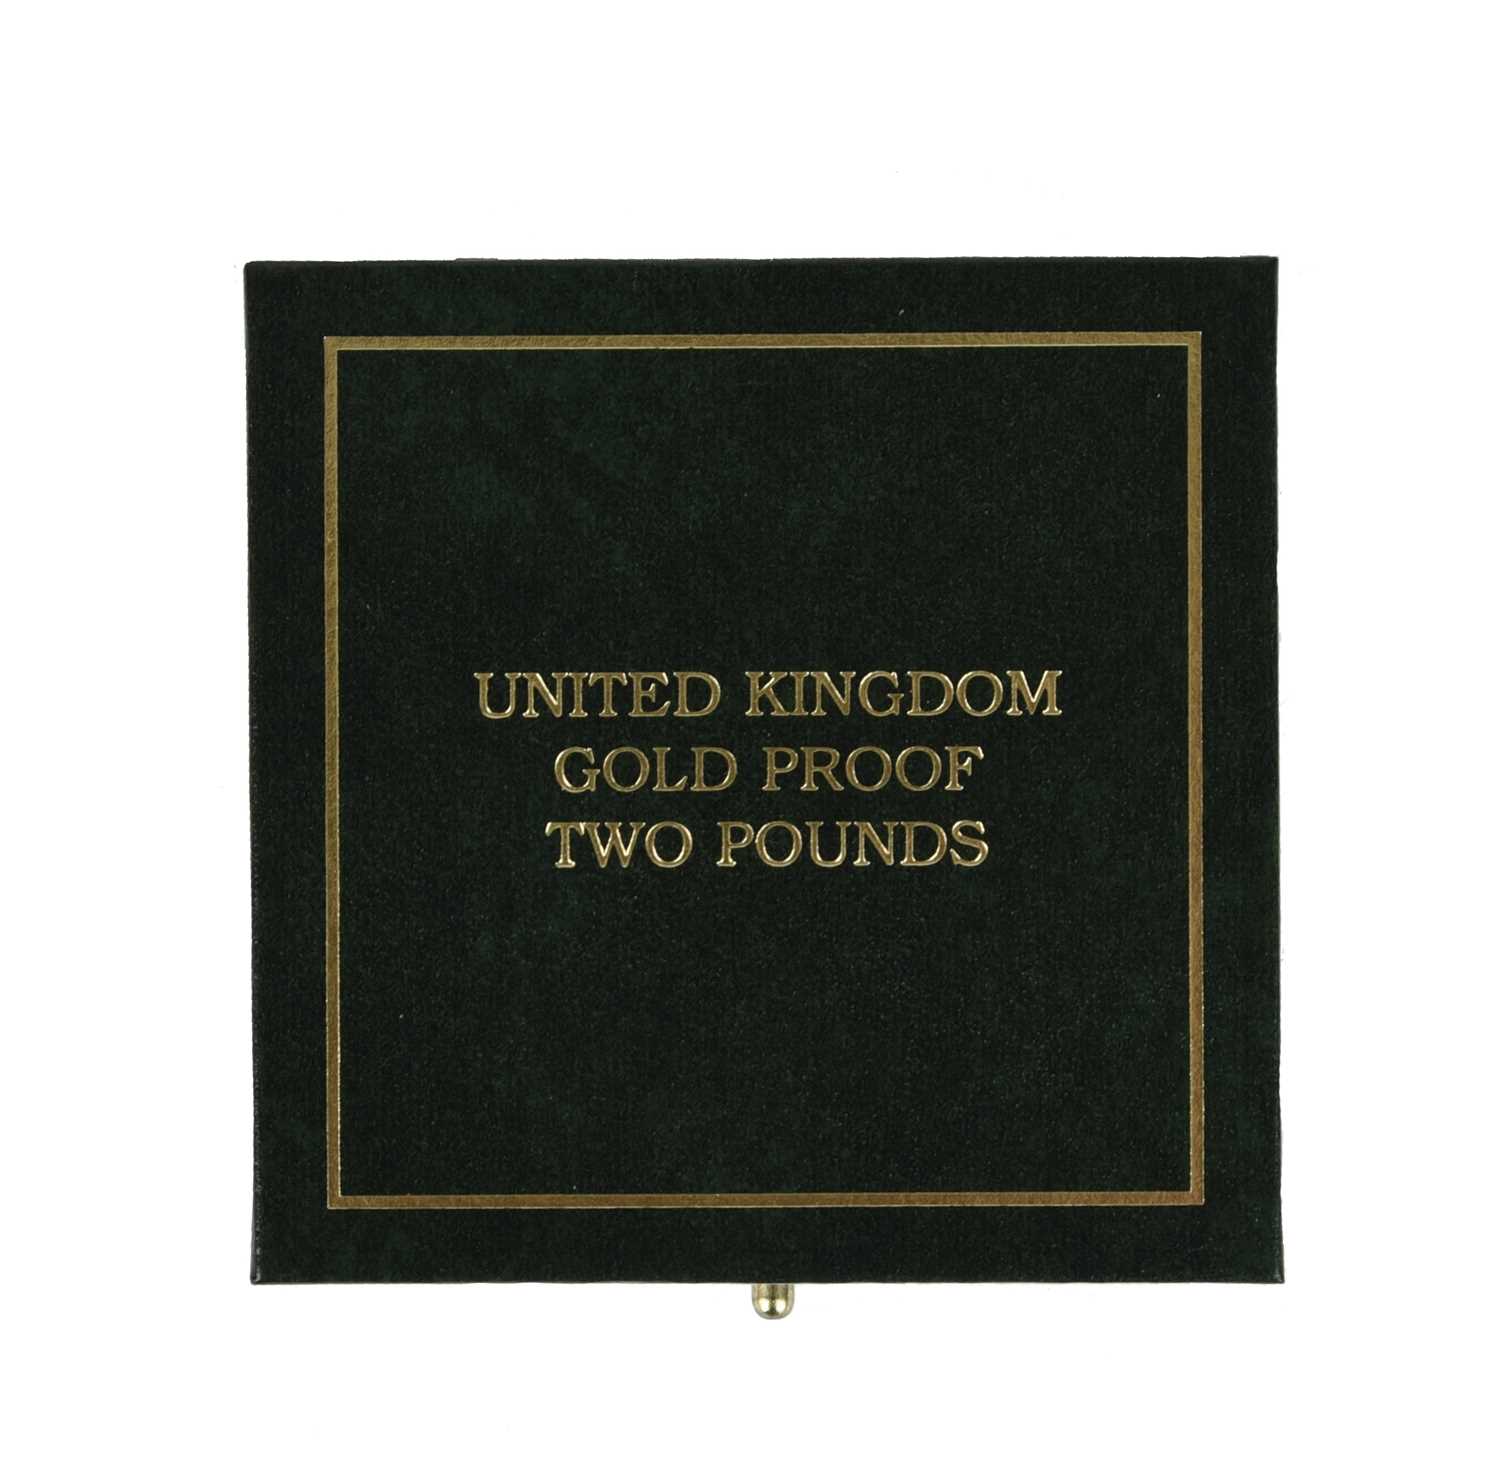 Elizabeth II, gold proof two pounds, 1997 (S 4318), cased with certificate. - Image 2 of 2